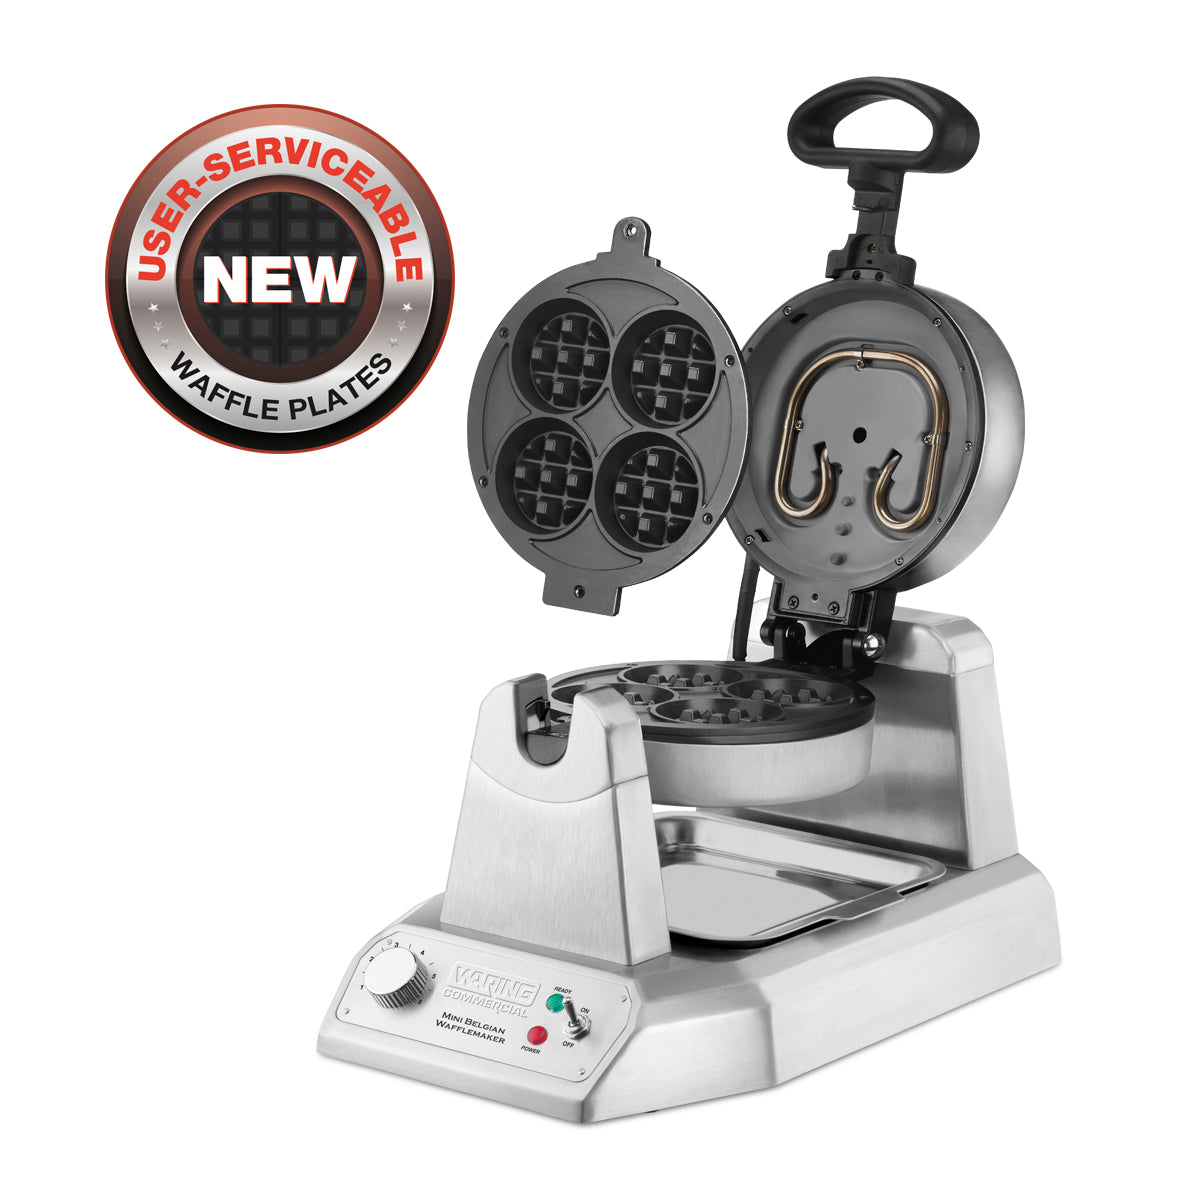 WMB400X Mini Belgian Waffle Maker by Waring Commercial